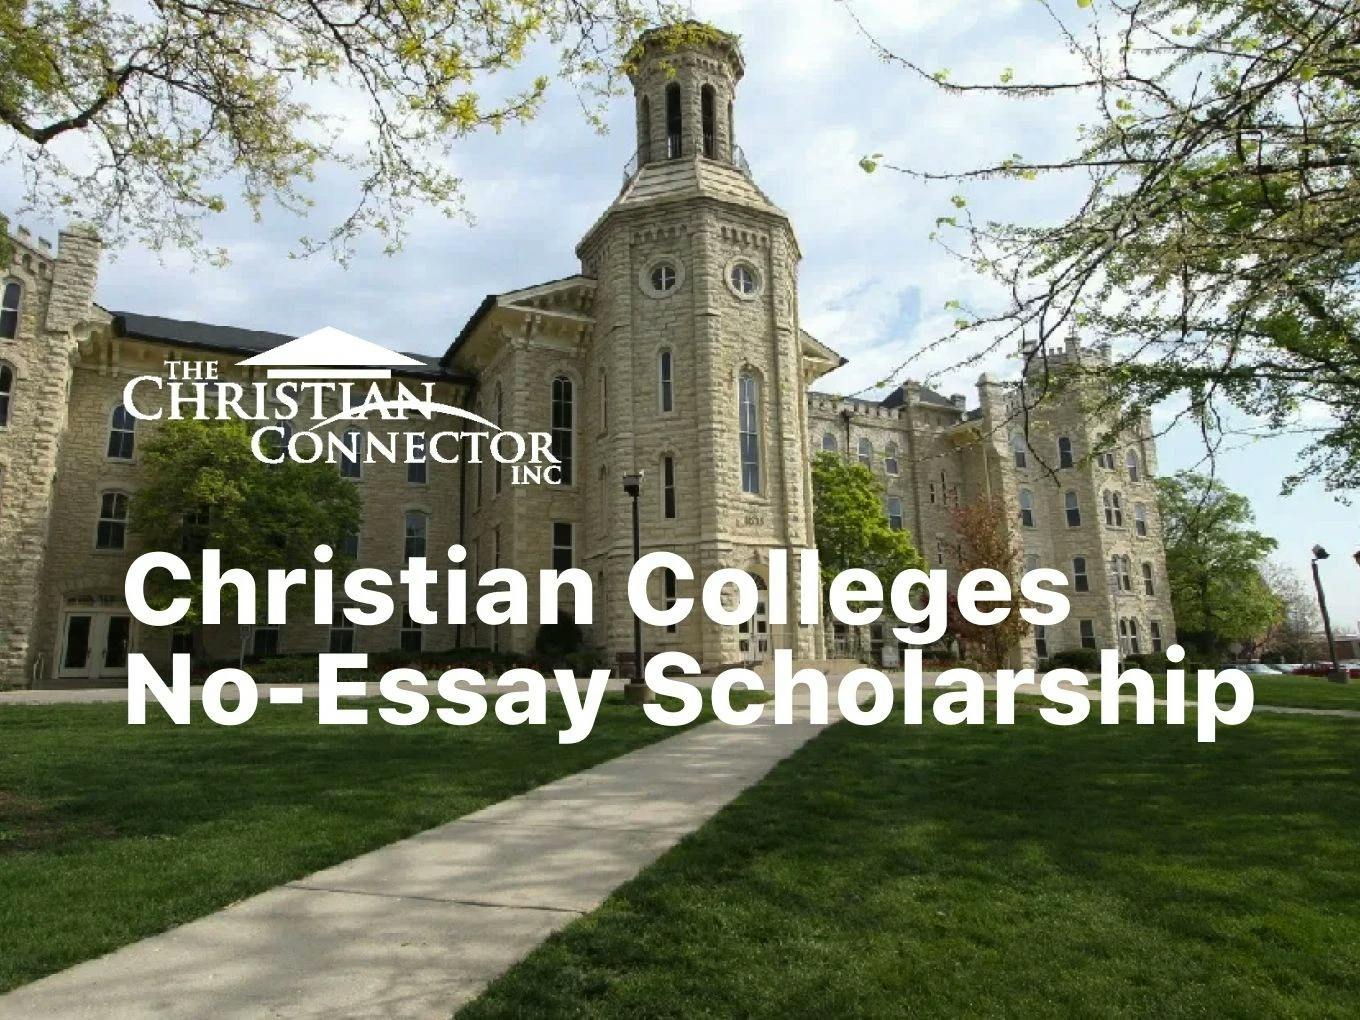 Christian Colleges No-Essay Scholarship